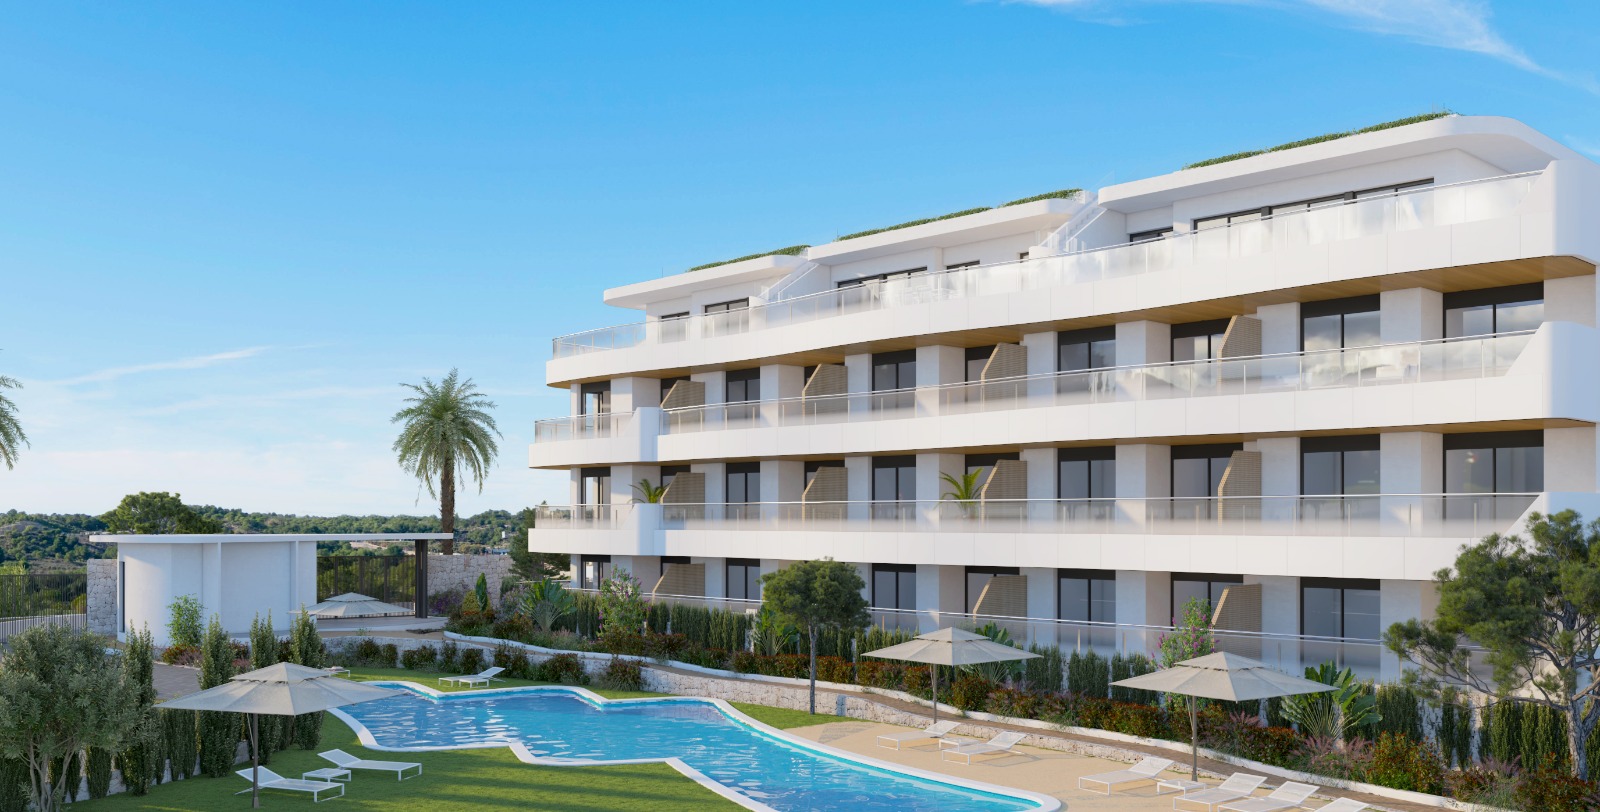 APARTMENTS TO BE BUILT IN PRIME LOCATION ORIHUELA COSTA